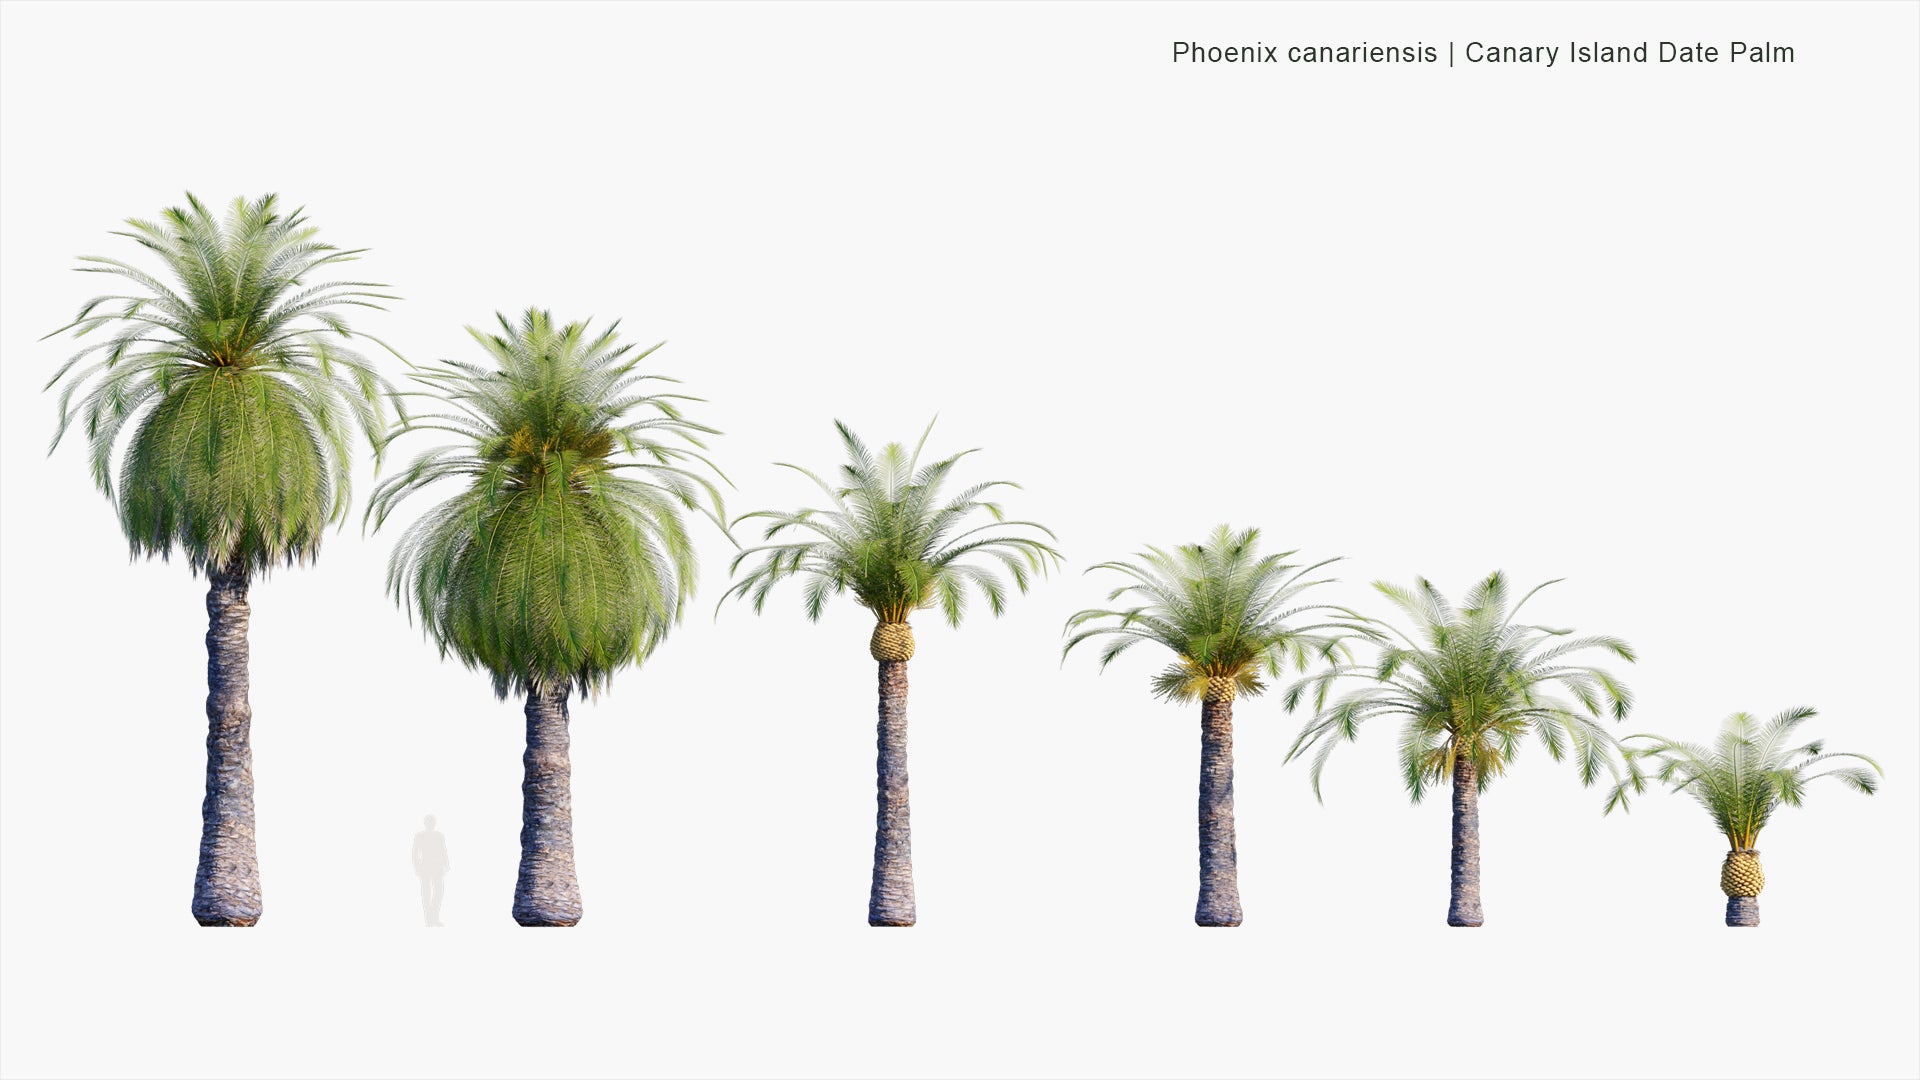 Low Poly Phoenix Canariensis - Canary Island Date Palm, Pineapple Palm (3D Model)